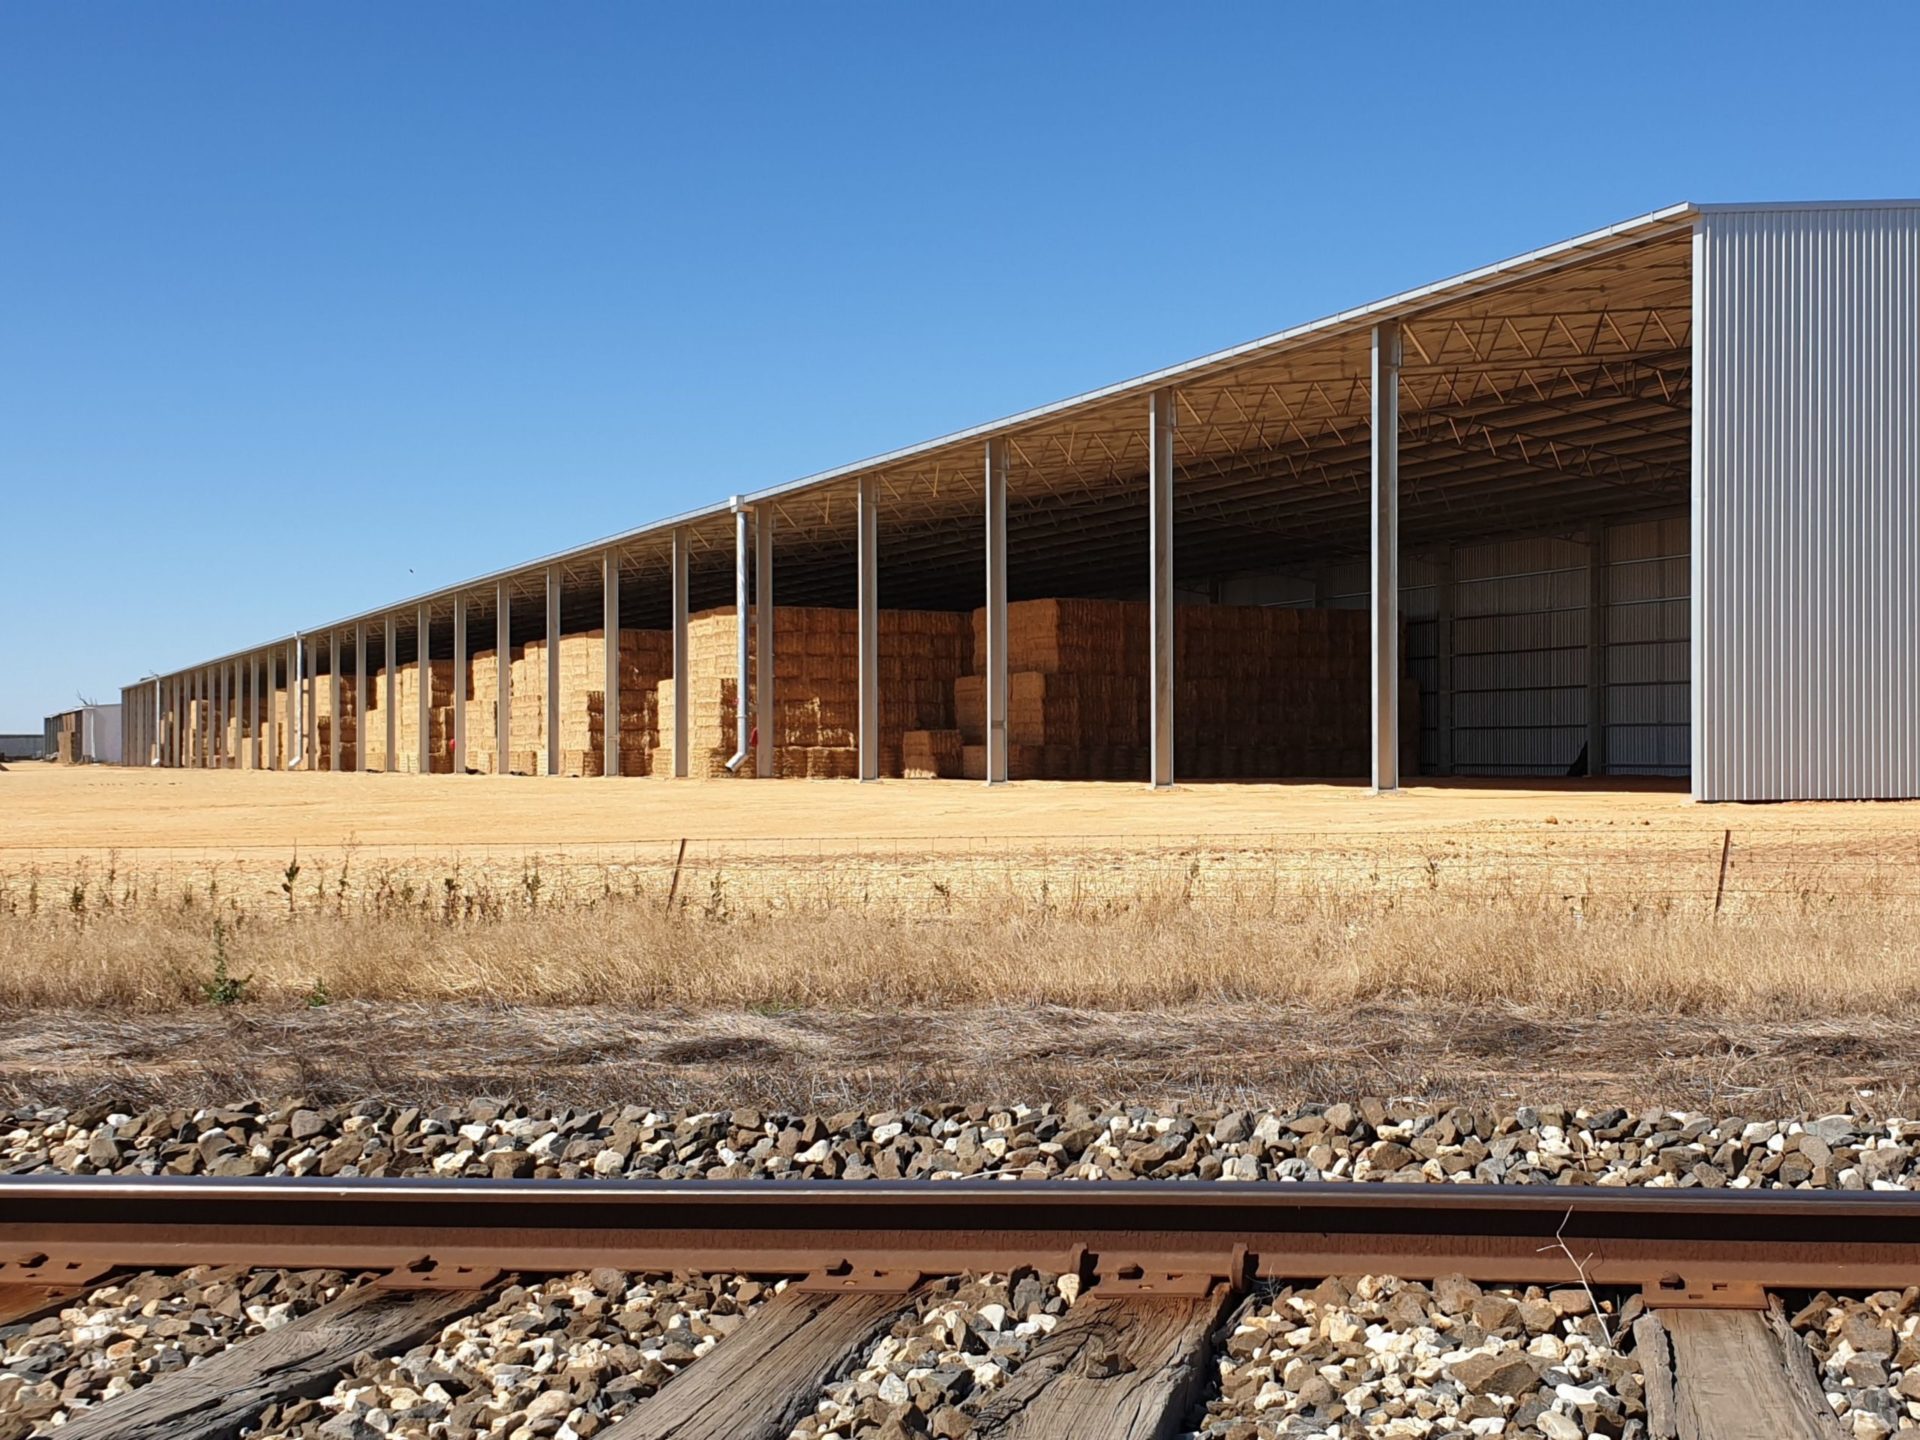 You are currently viewing 270m x 27m x 9m open-front export hay shed